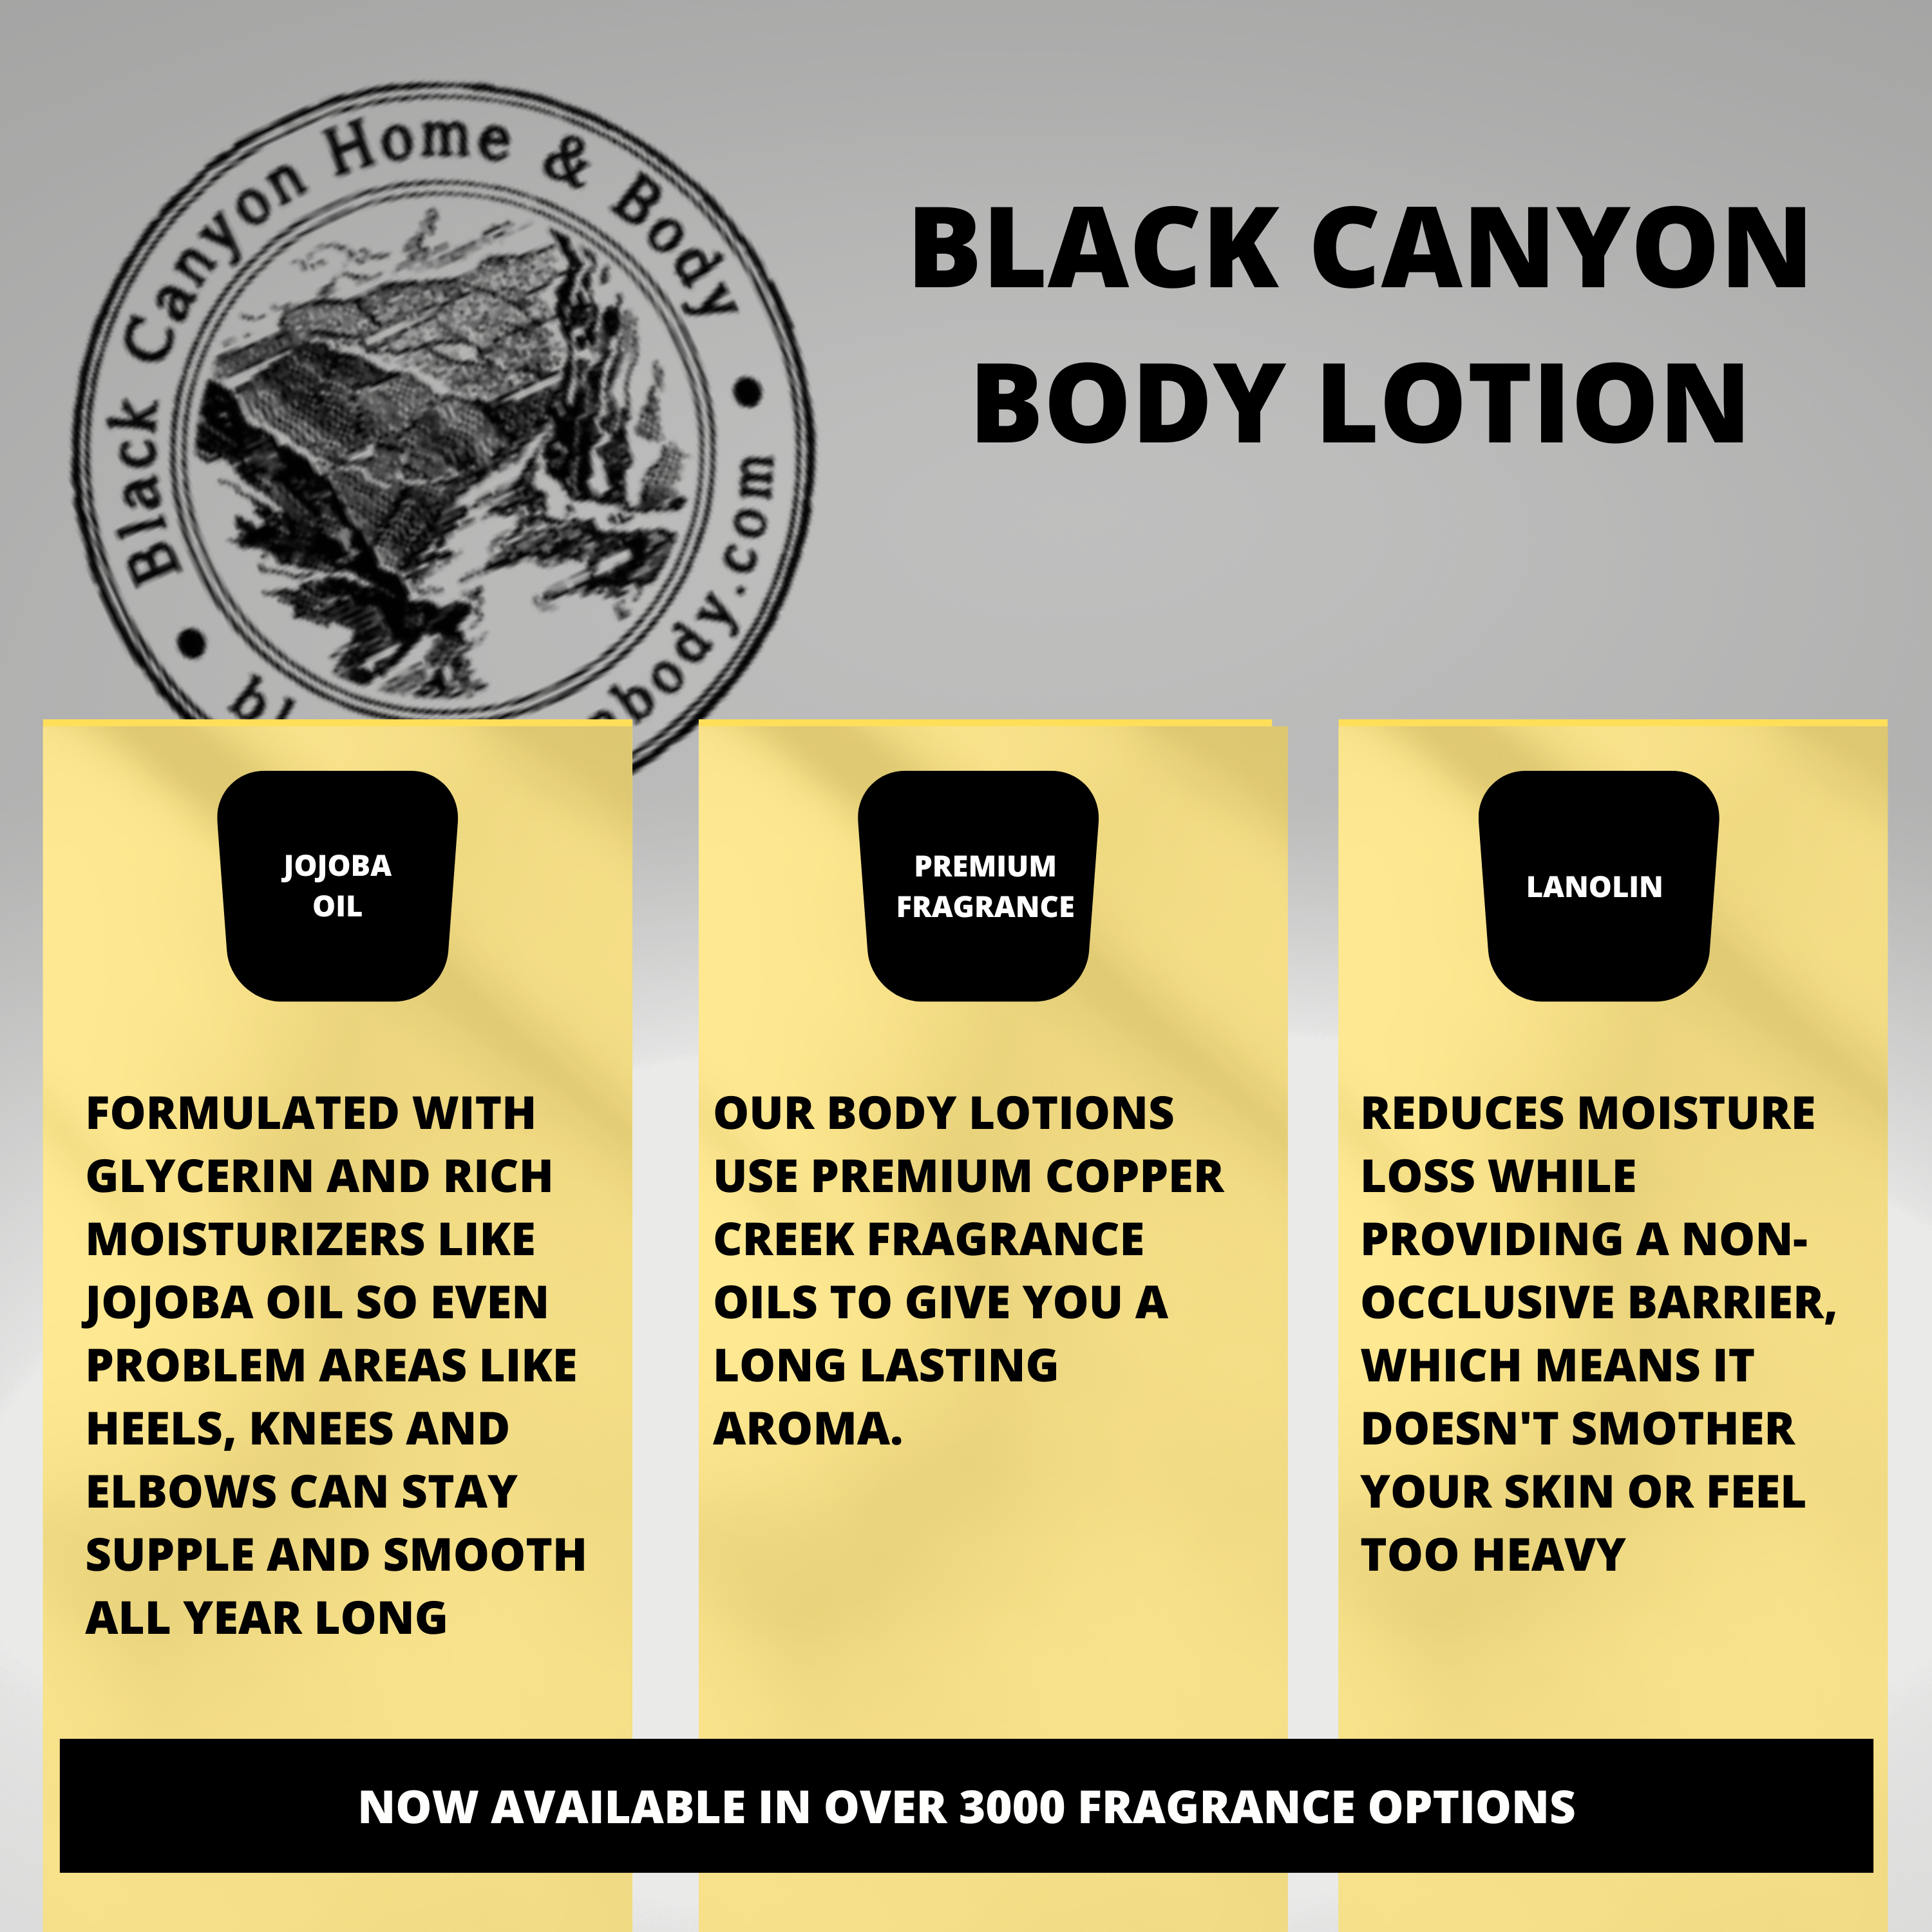 Black Canyon White Tea & Apricot Scented Luxury Body Lotion with Lanolin and Jojoba Oil